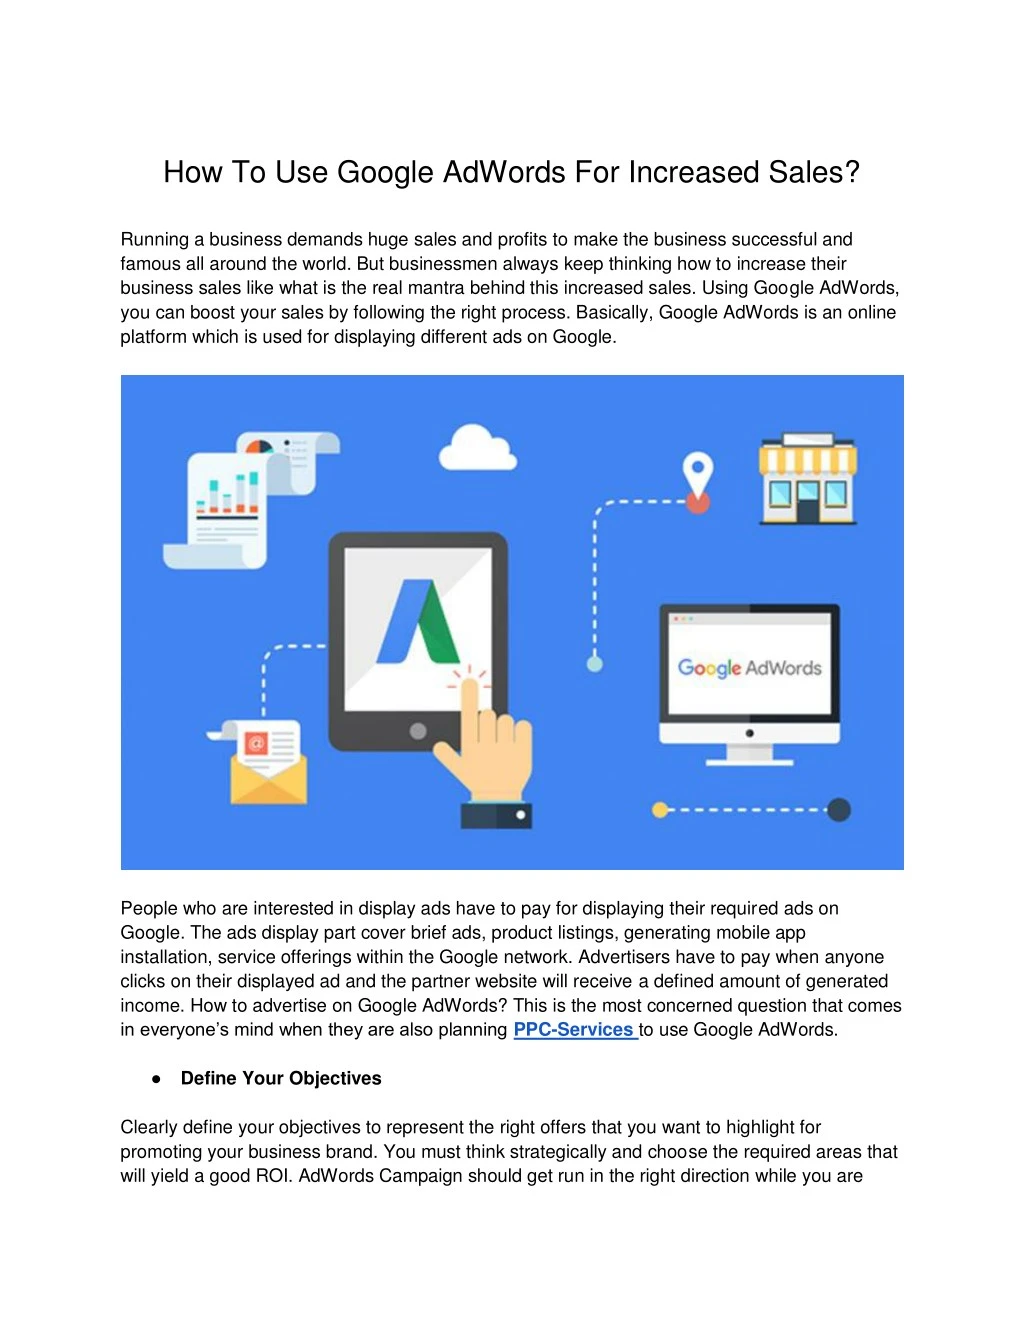 how to use google adwords for increased sales